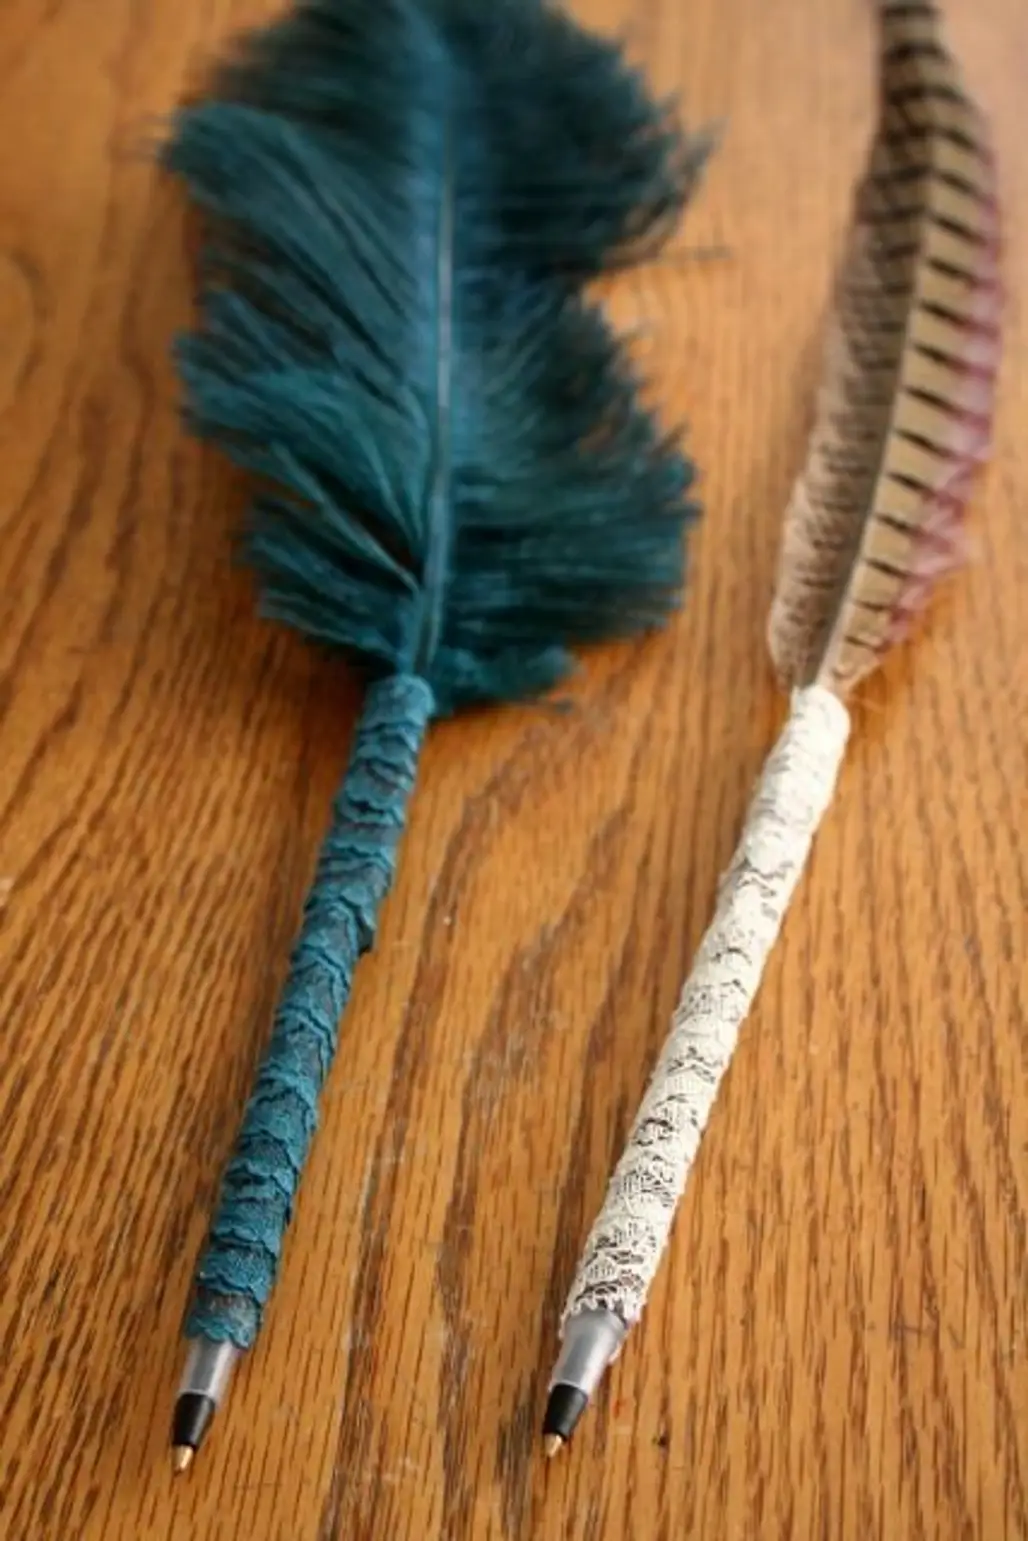 Feather Pens